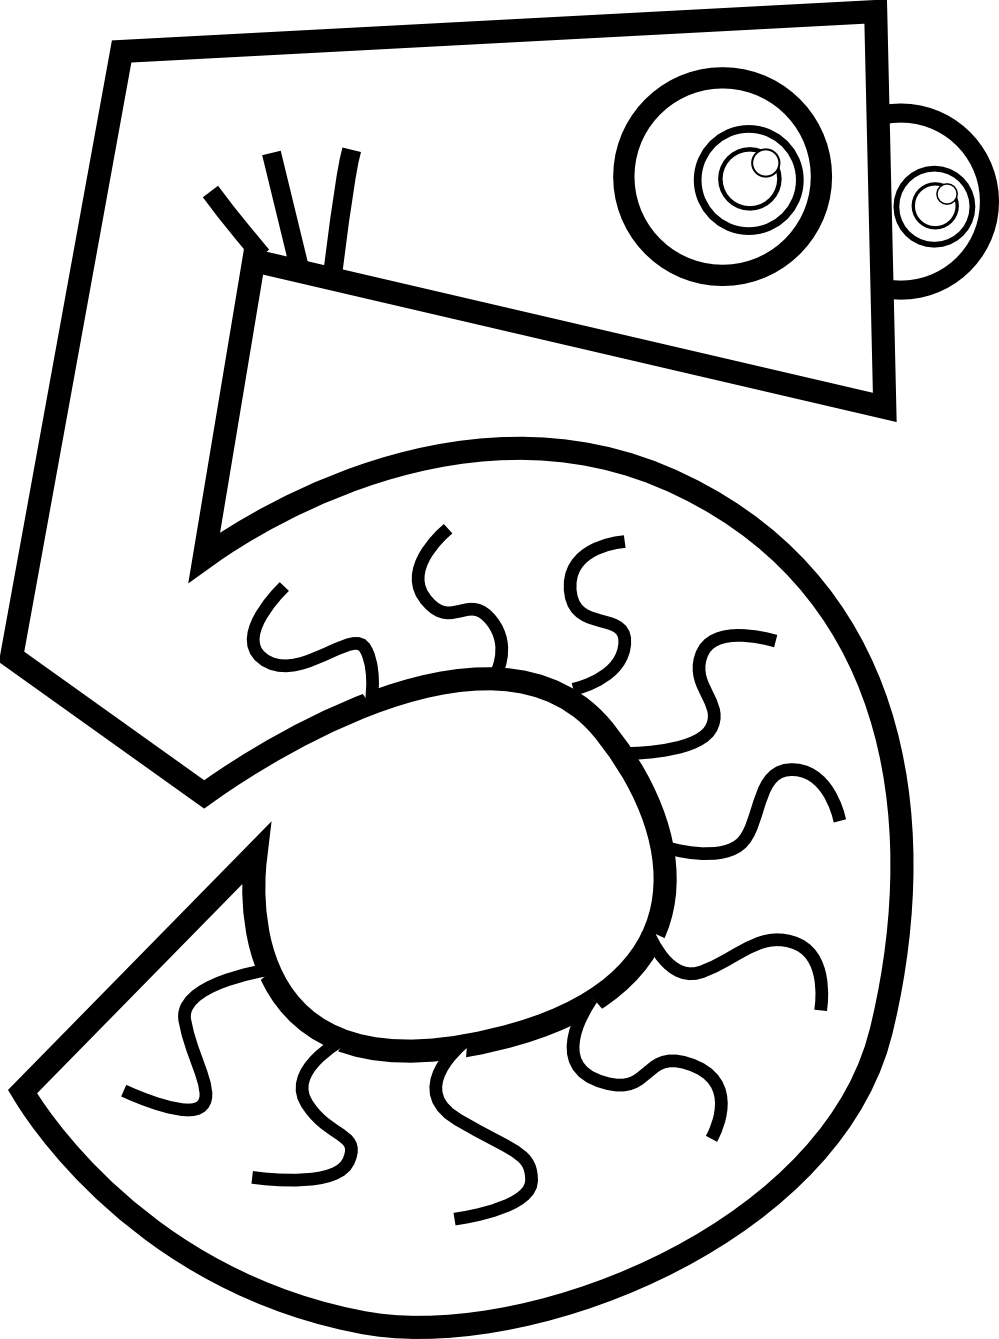 Numbers Black And White | Clipart library - Free Clipart Images